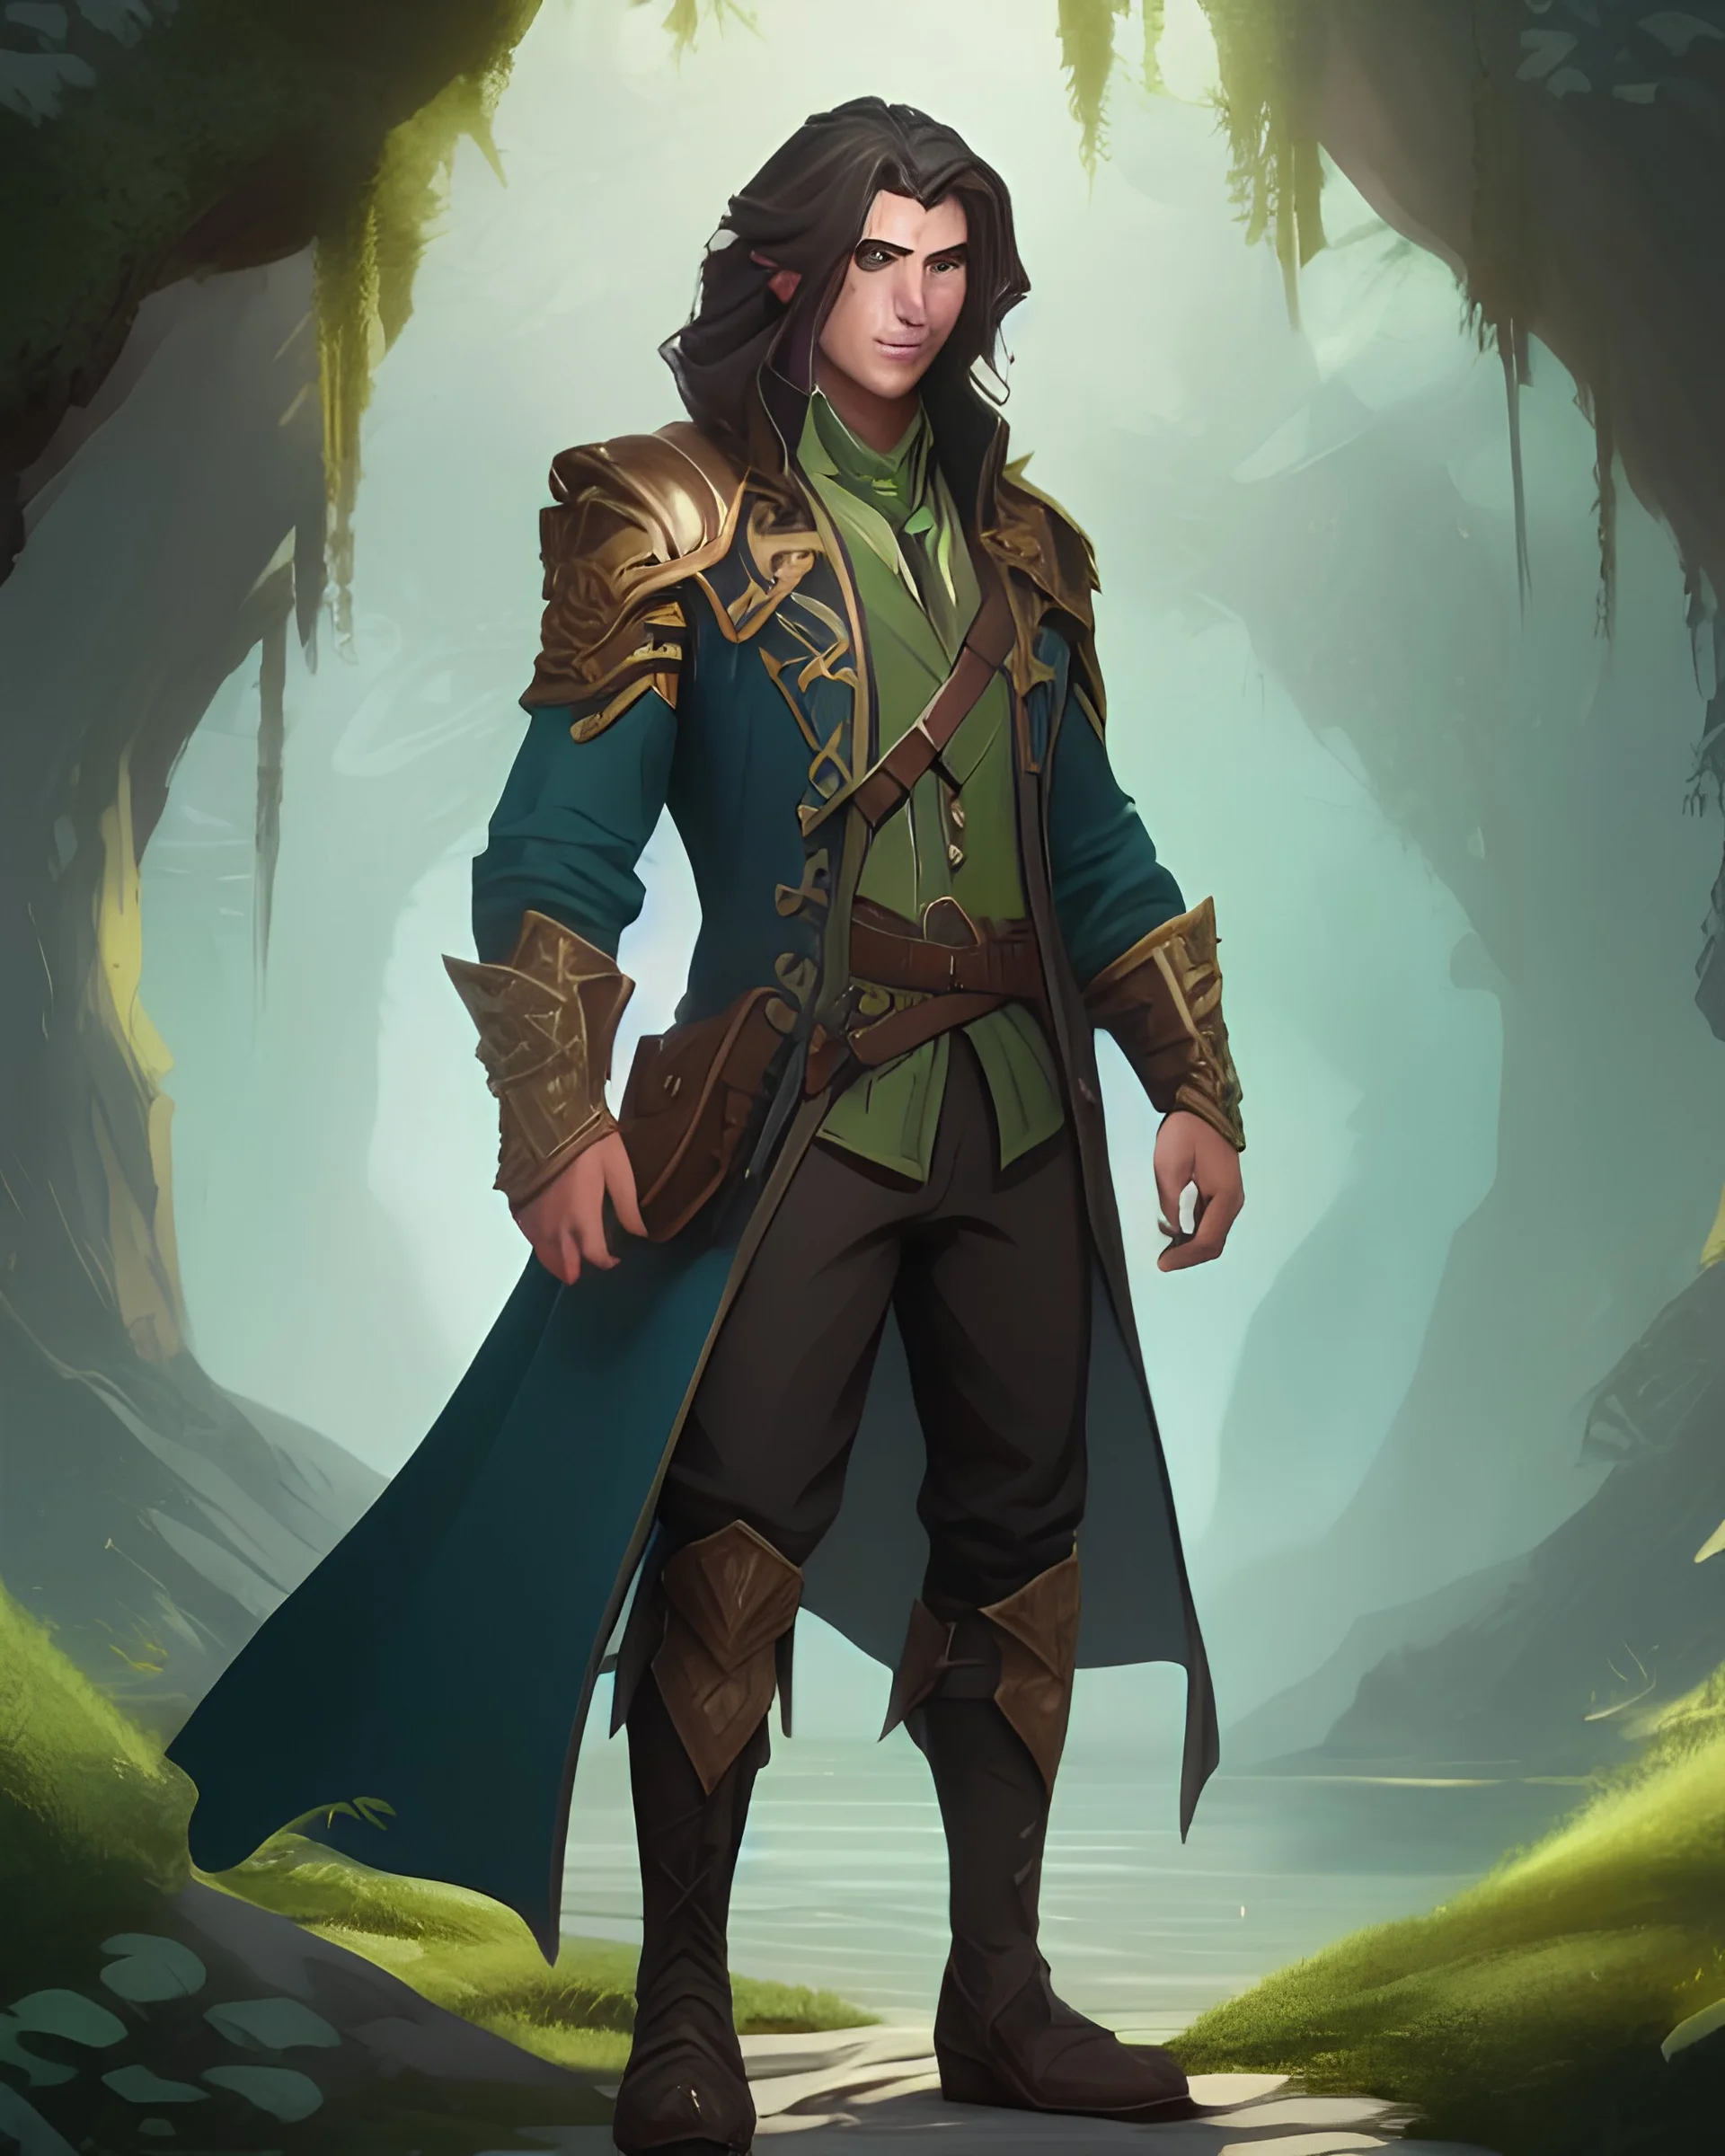 please create a full body image, medium portrait and small portrait of a tall, young, male character with mid-length hair and fantasy clothing, generally looking similar to @mossy_socks on instagram